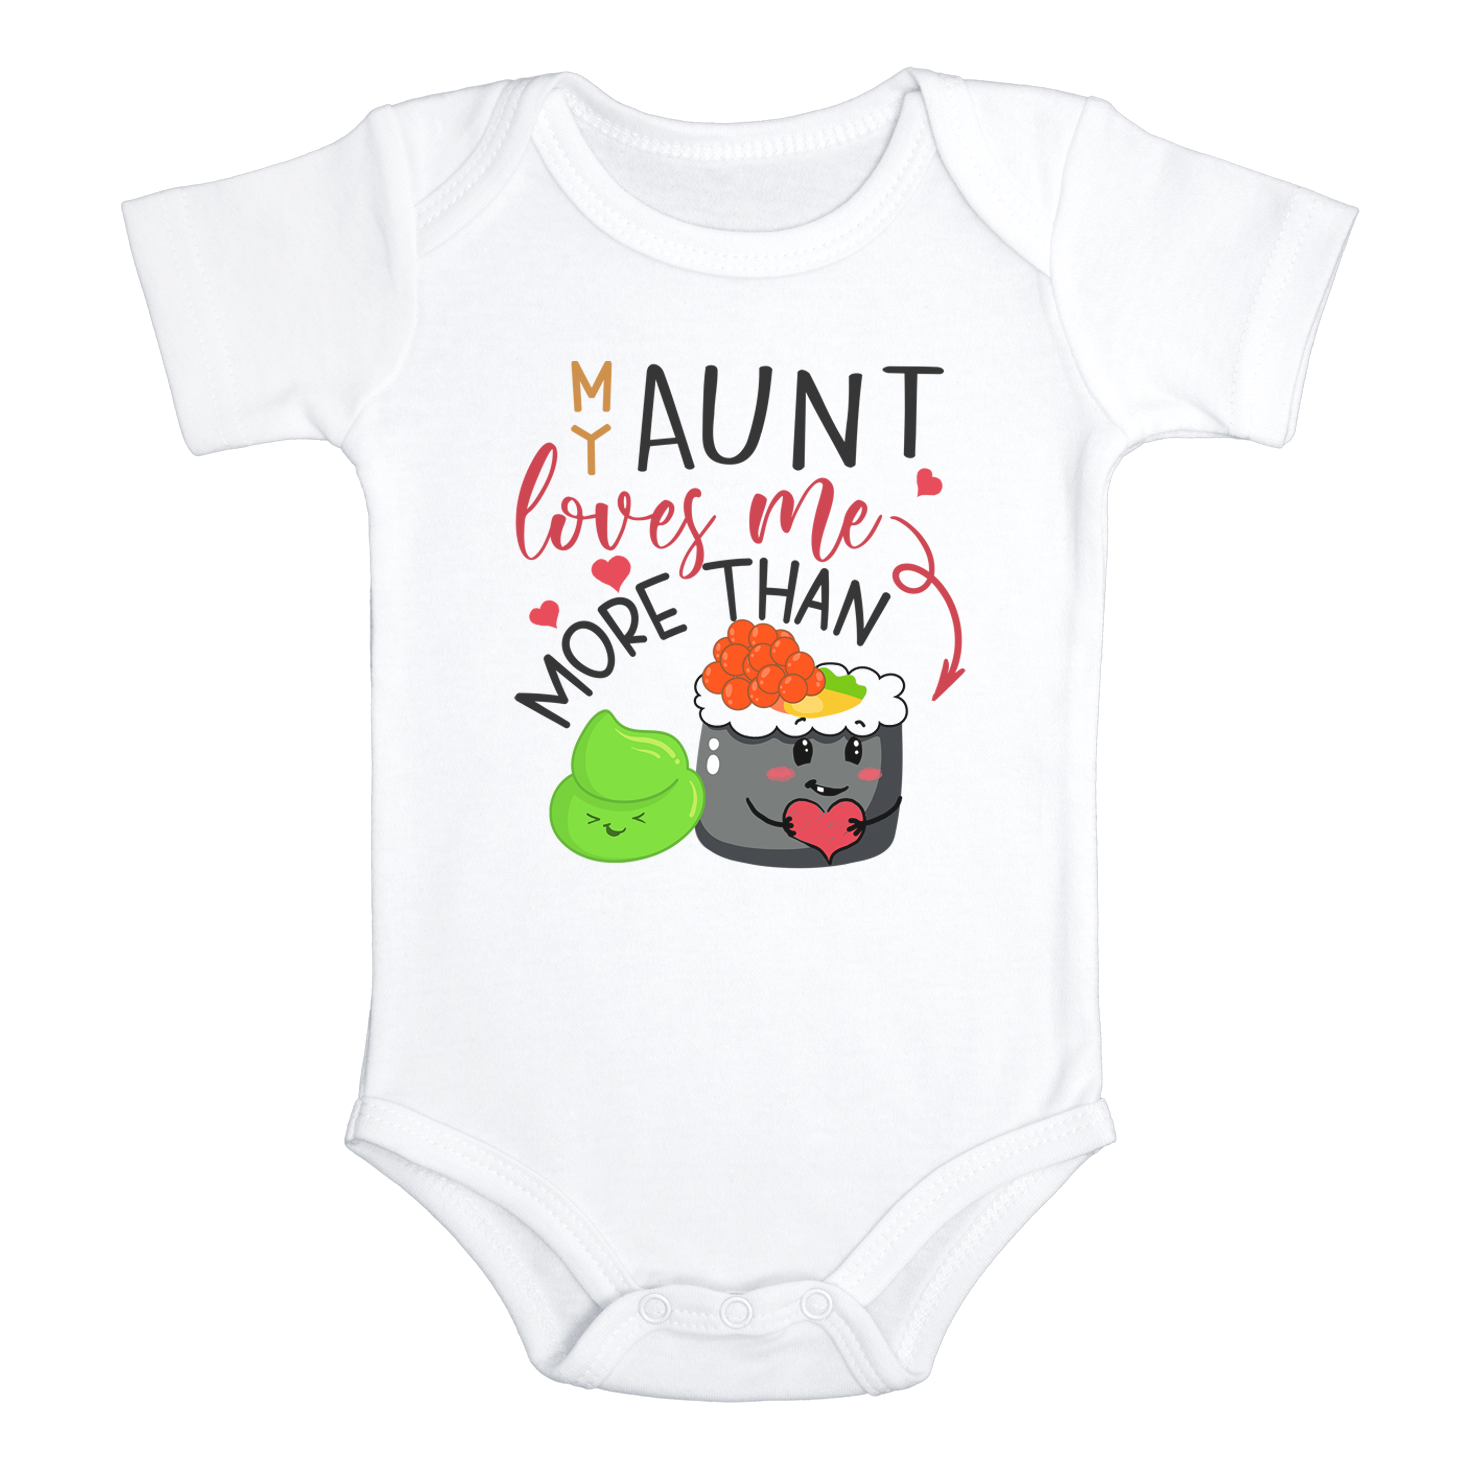 MY AUNT LOVES ME MORE THAN SUSHI Funny baby onesies aunt bodysuit (white: short or long sleeve) - HappyAddition